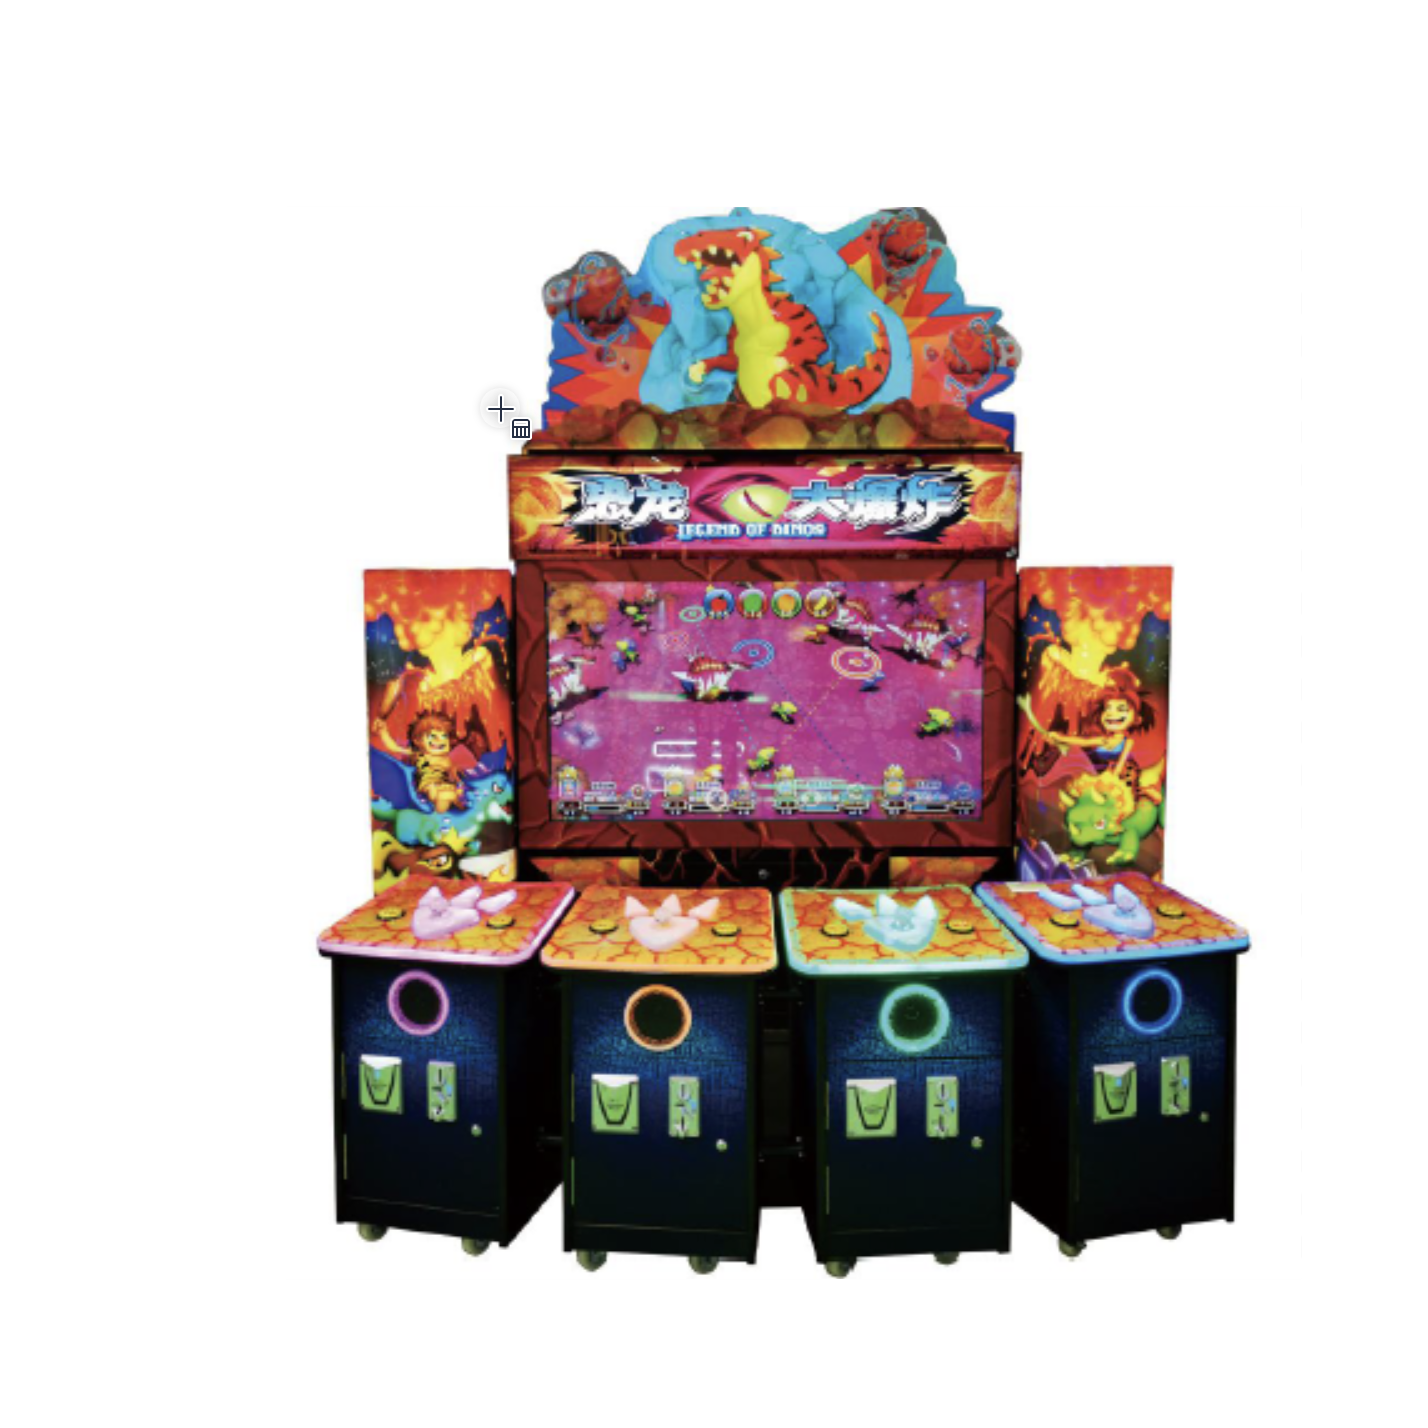 Most Popular Ticket Redemption Video Arcade Machine For Sale Made In China